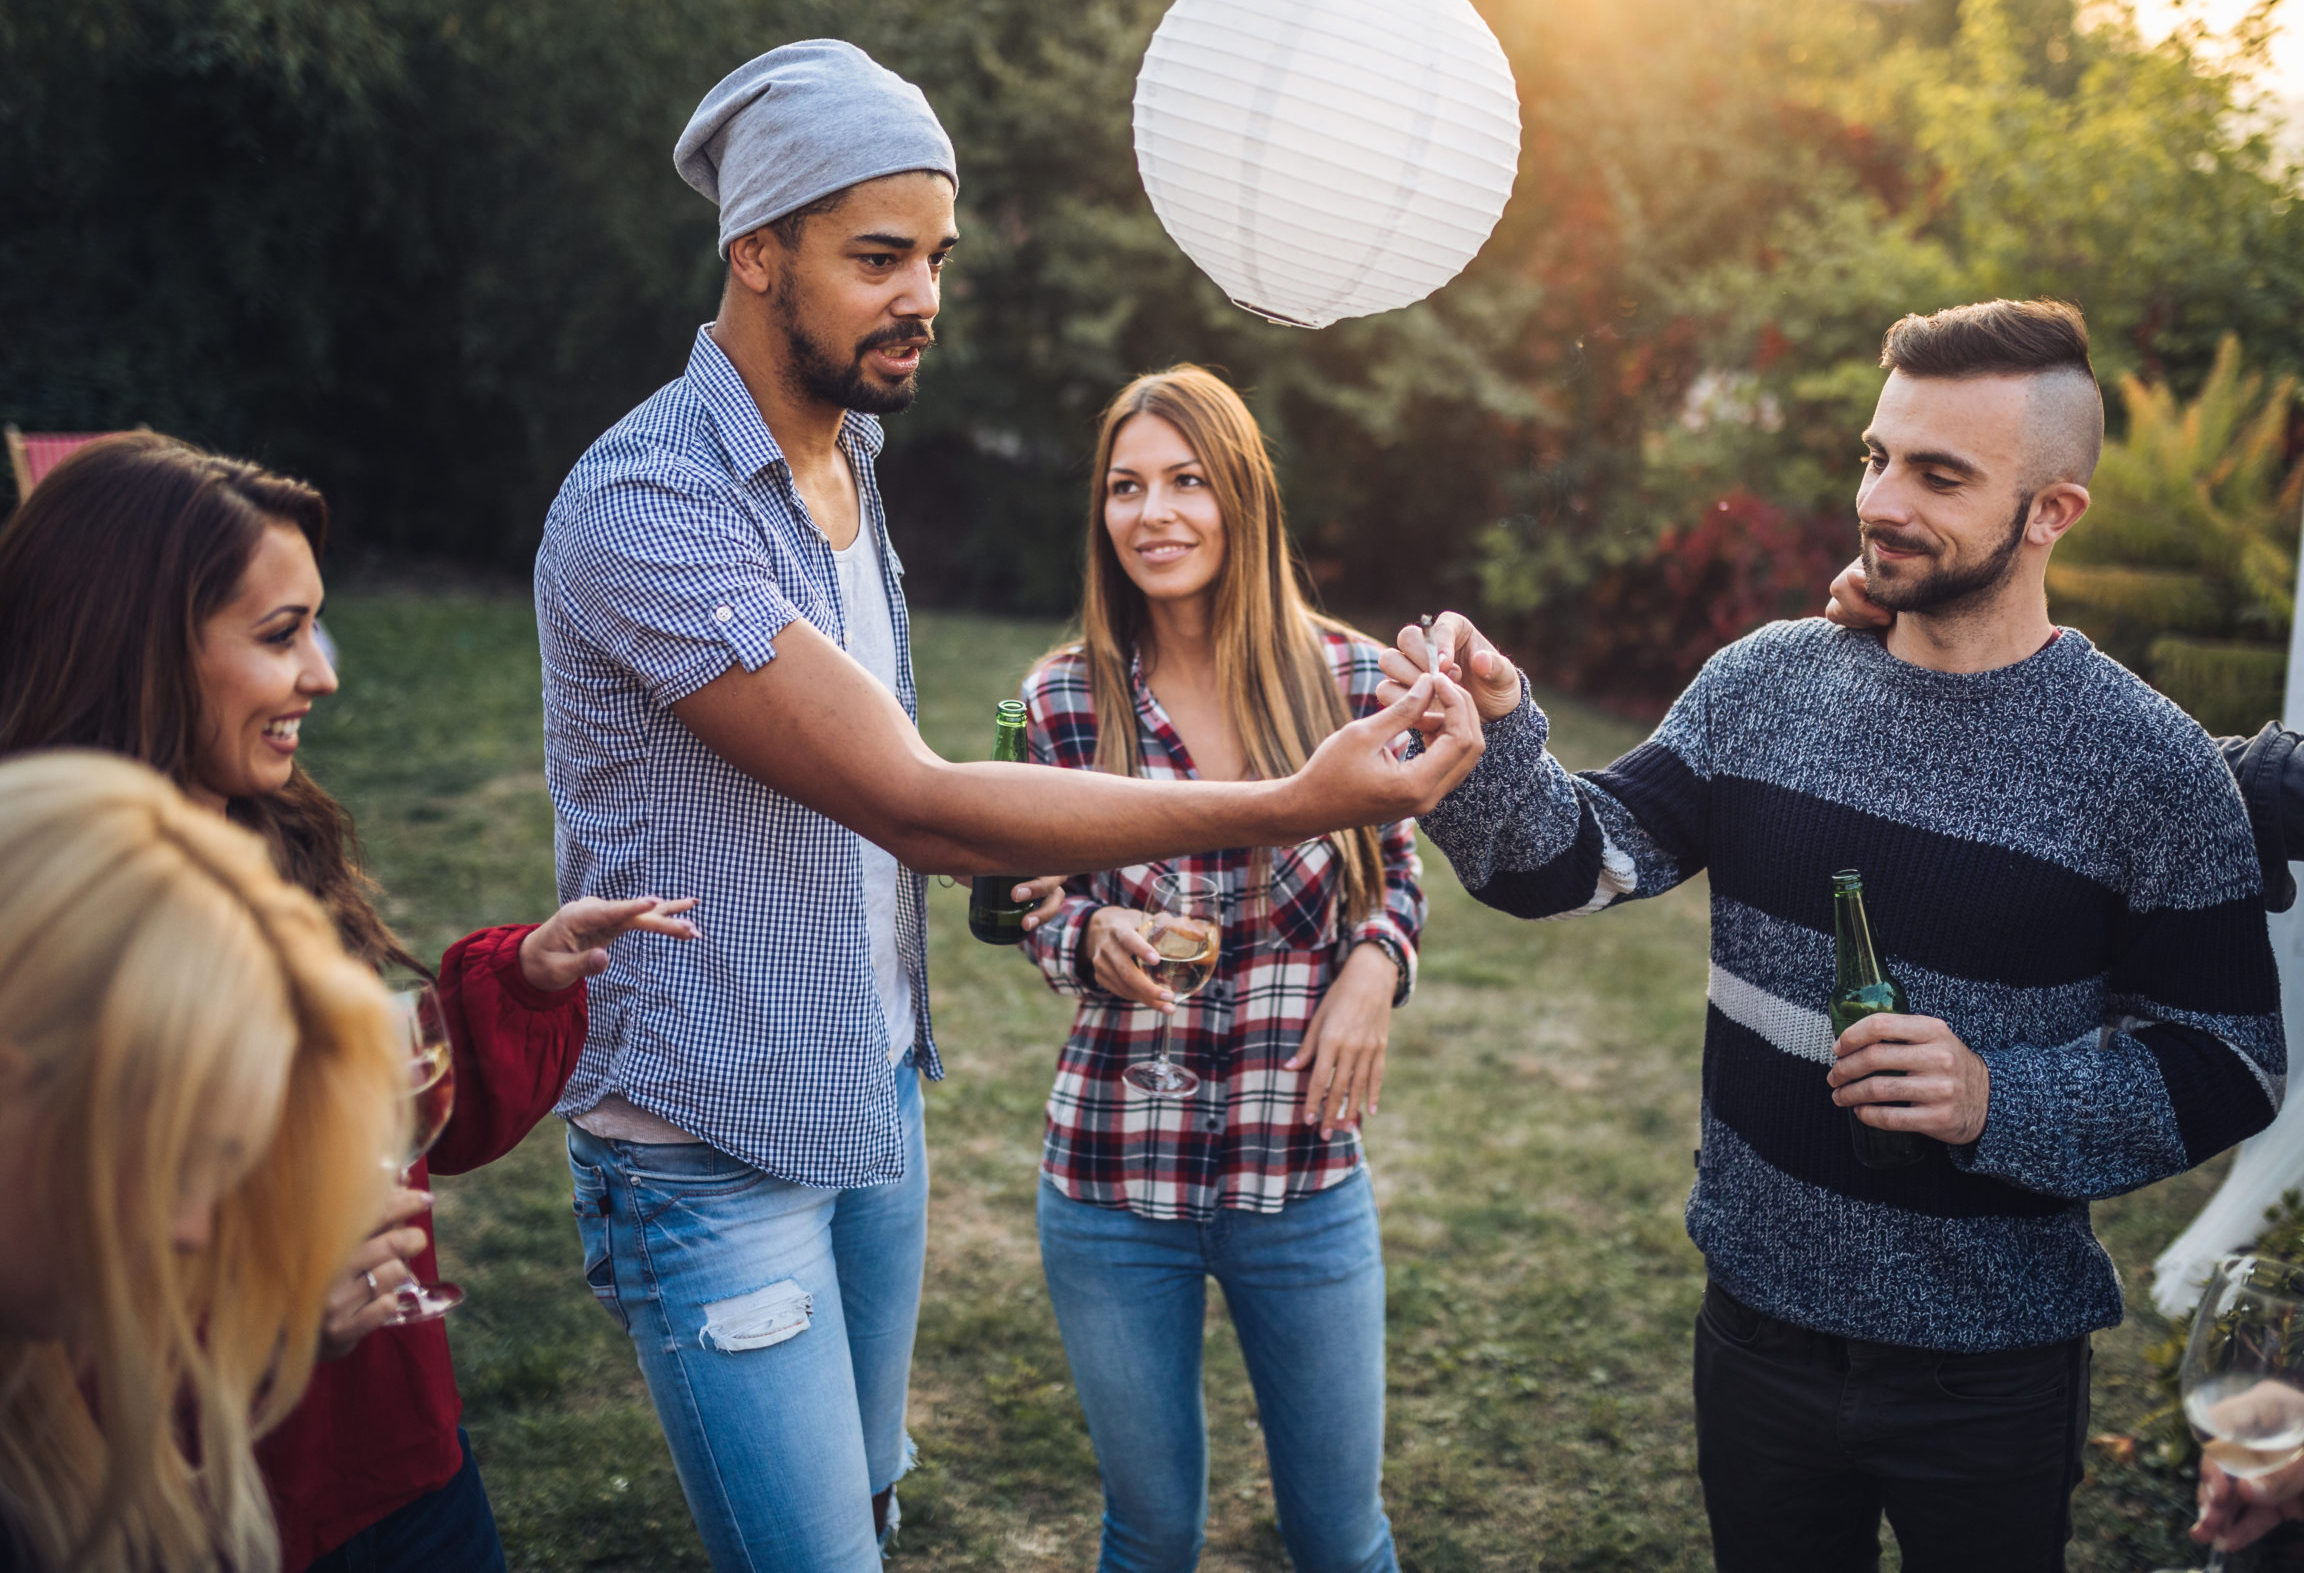 Young and mixed ethnicity group having fun together outside, drinking, and passing a joint.